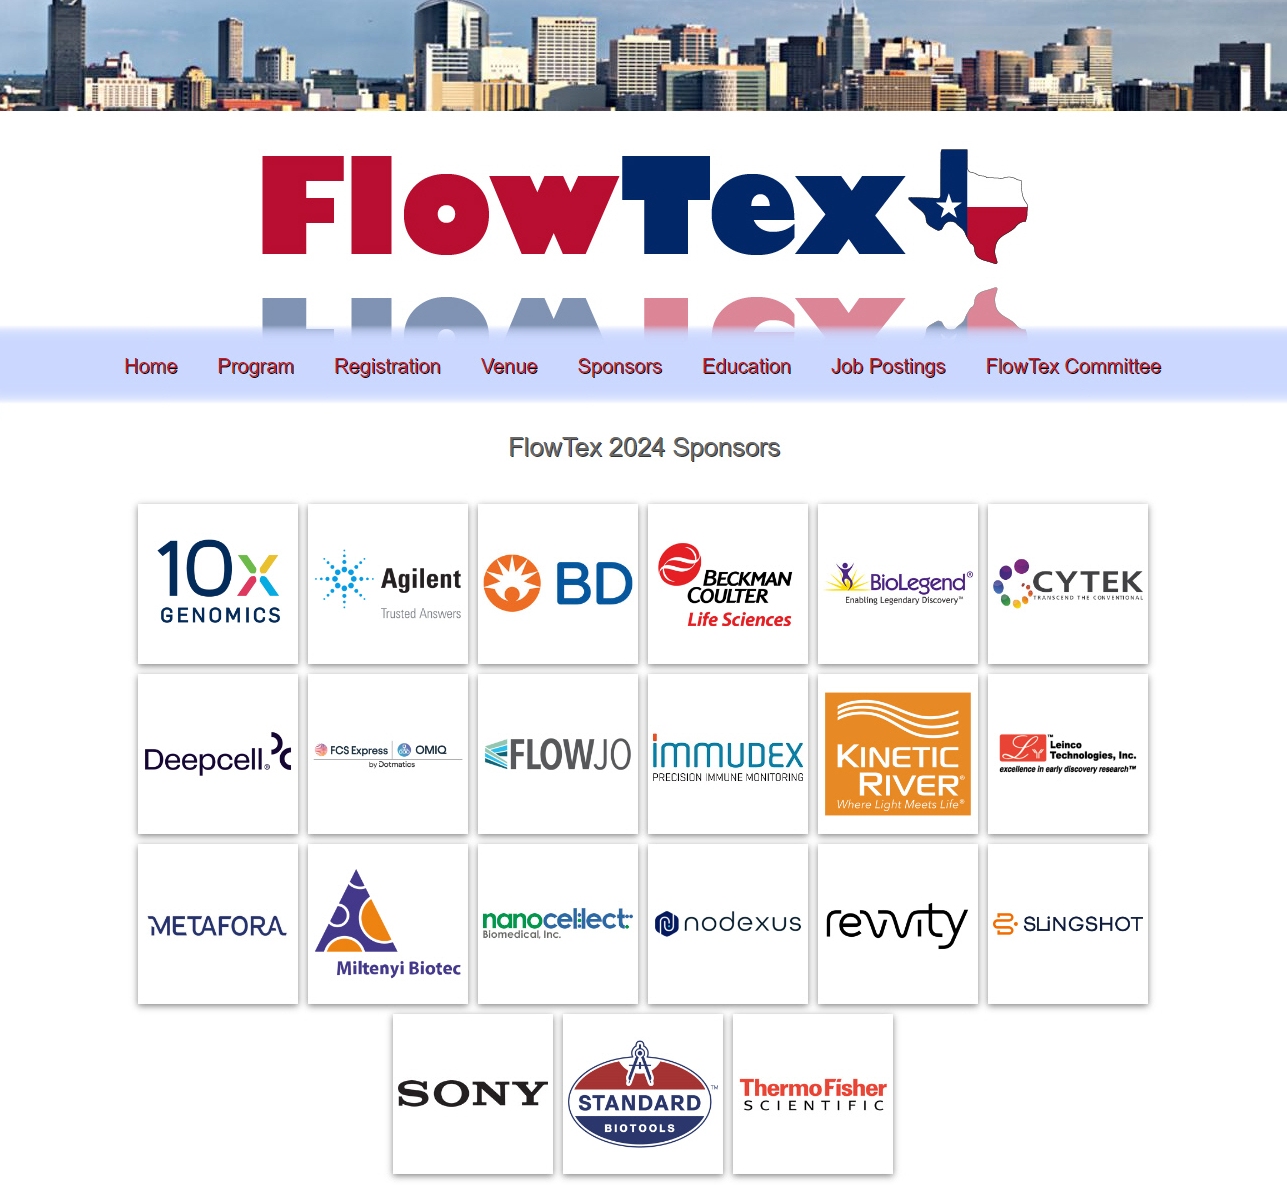 We Are Going To FlowTex 2024!